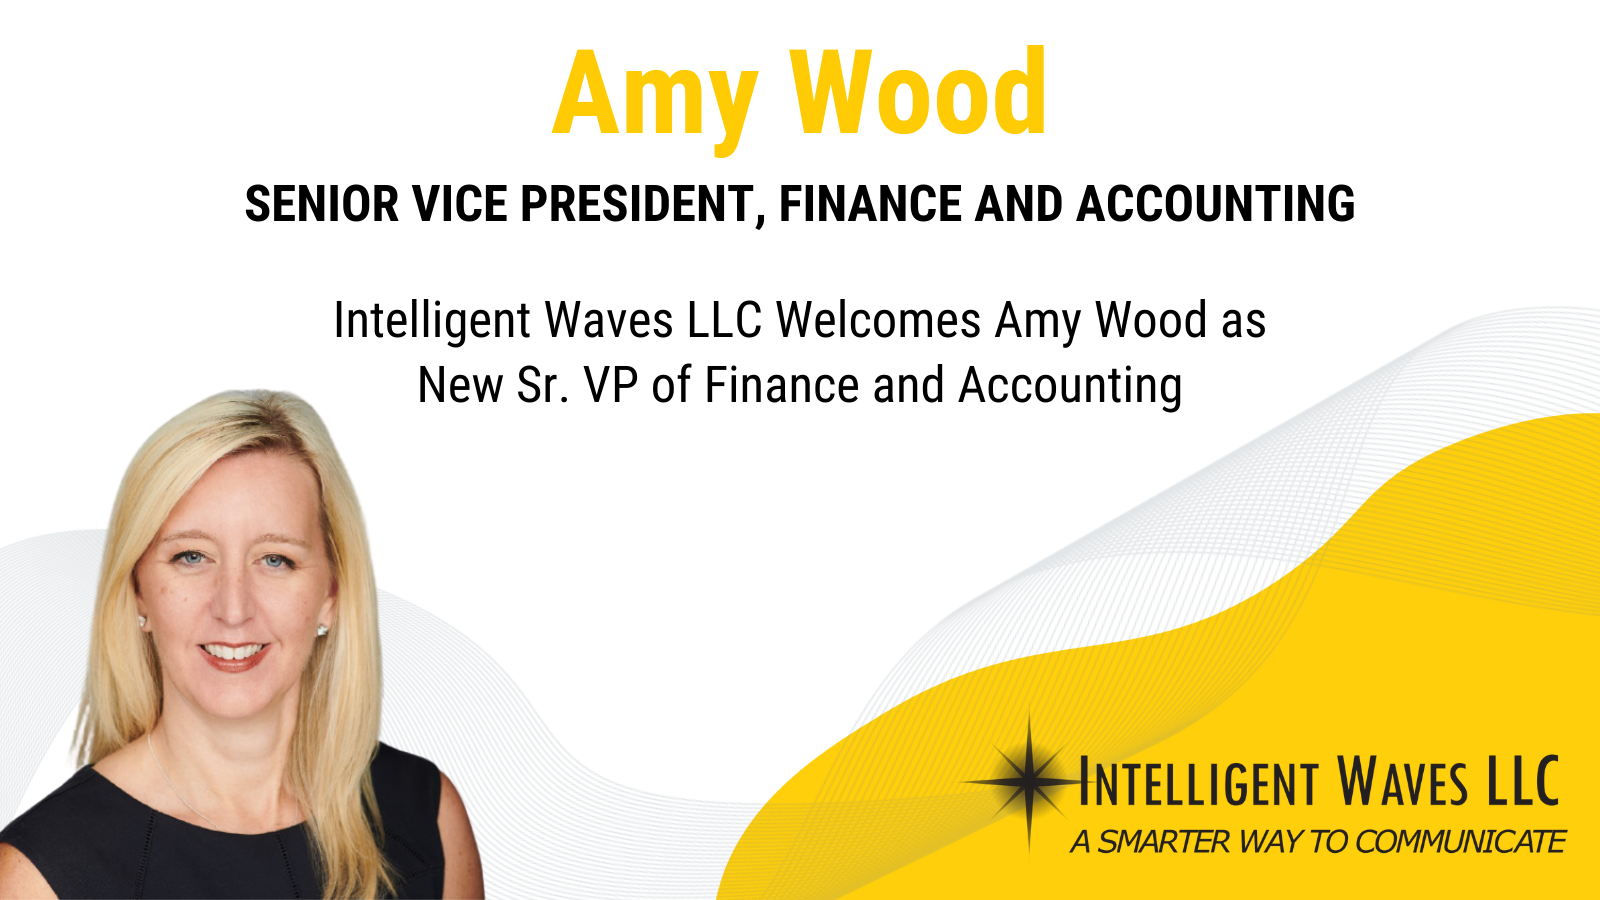 Amy Wood, Senior VP Finance and Accounting